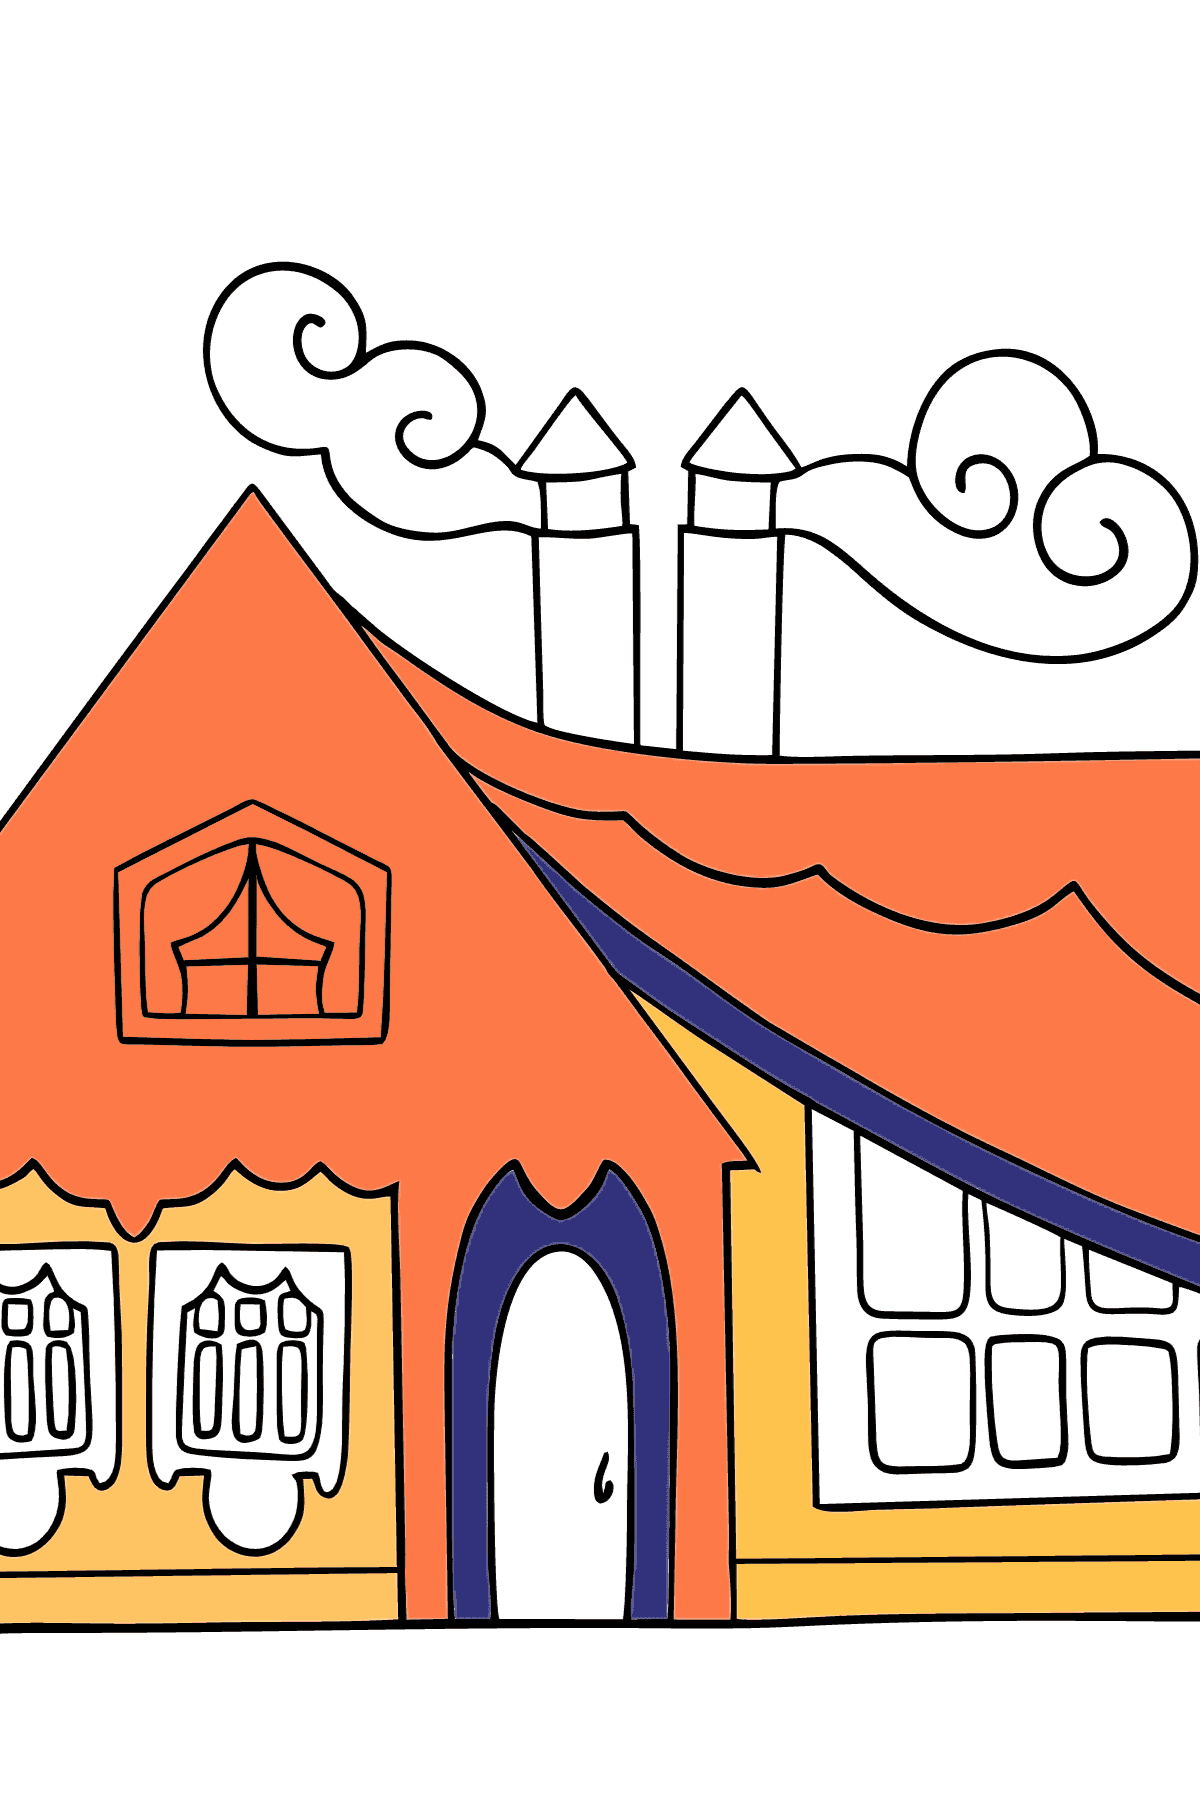 Tiny House Coloring Page - Coloring Pages for Kids